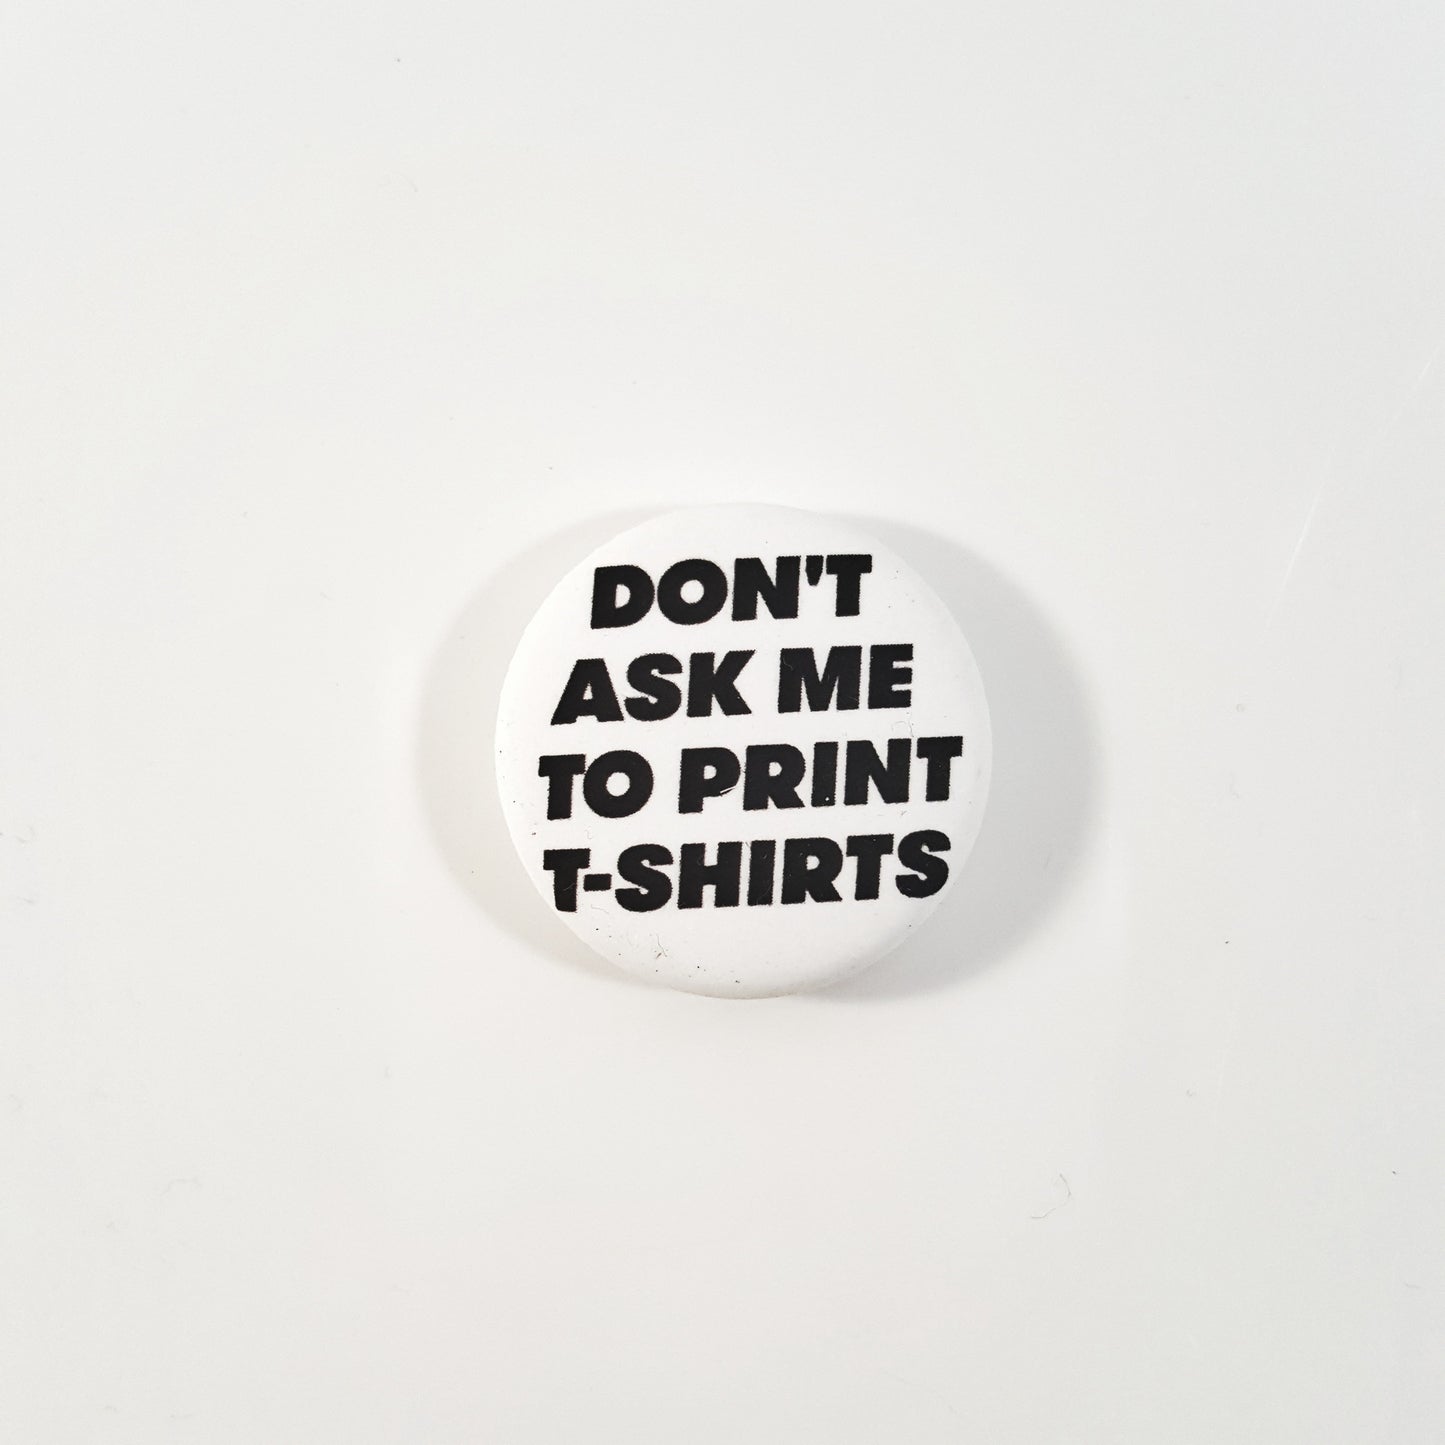 IRWIN, Todd: 'Don't Ask Me to Print T-Shirts' Button